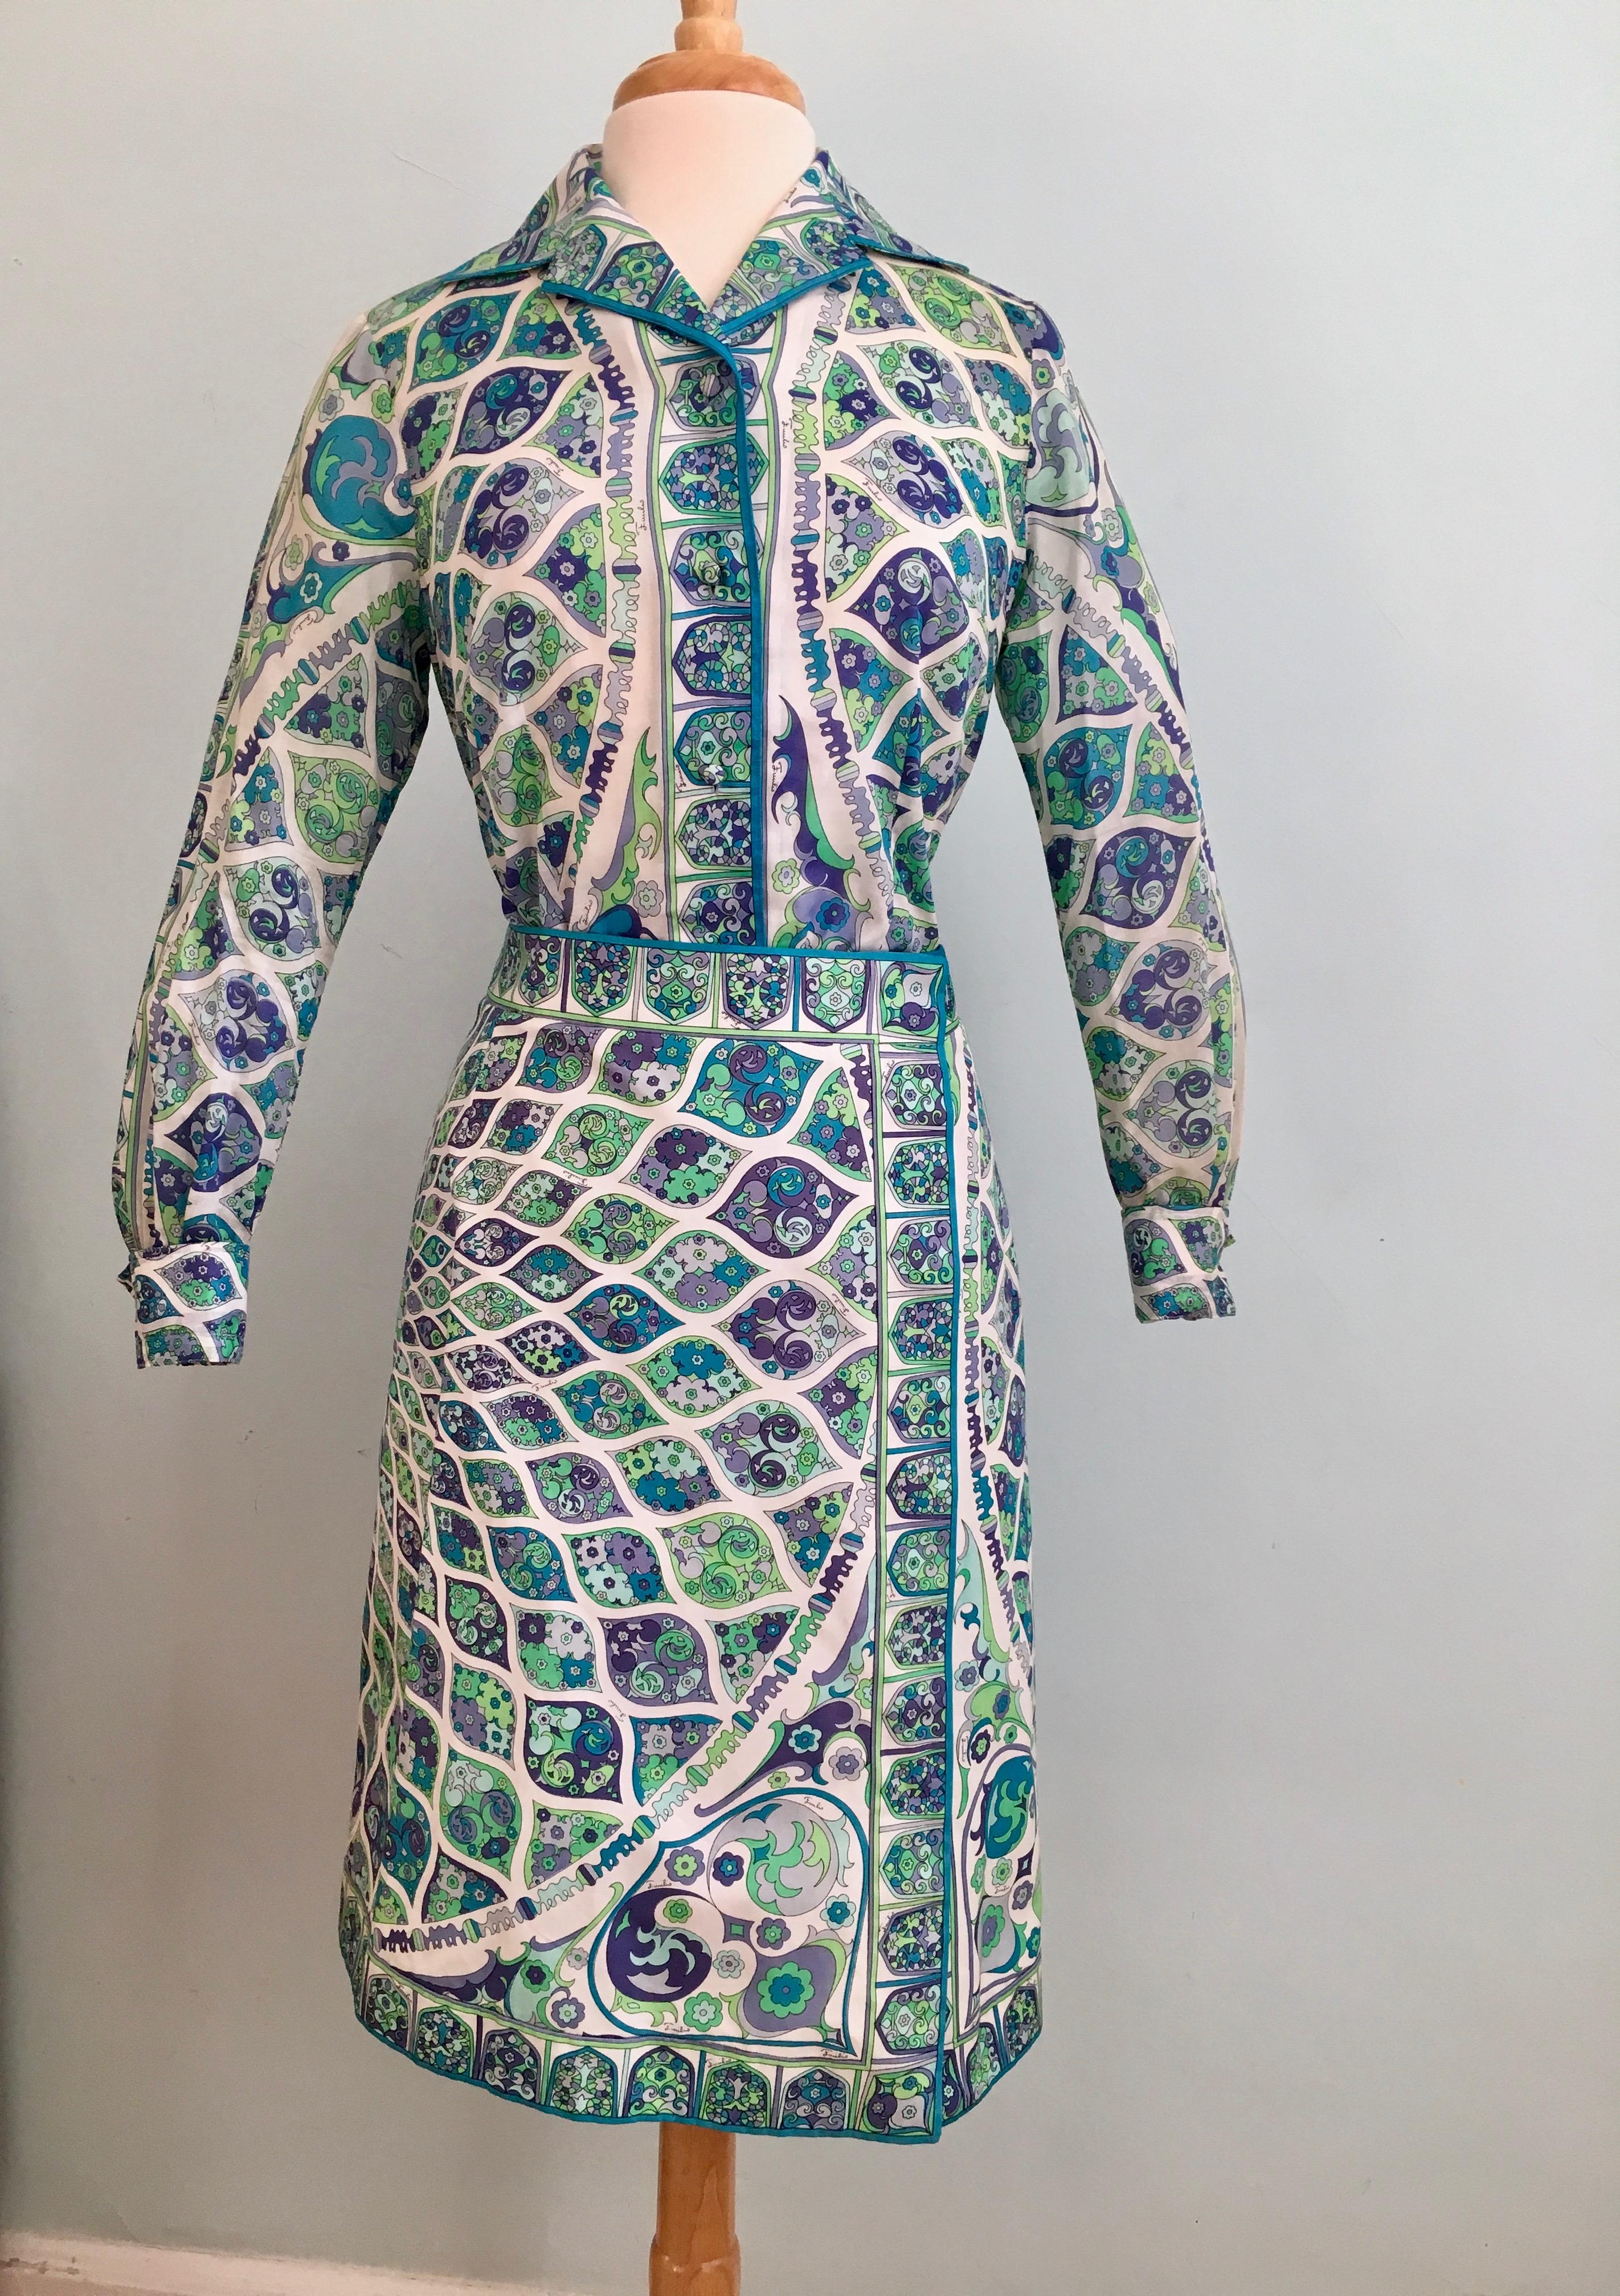 1960s Emilio Pucci lightweight cotton blouse and A-line skirt set.  Features vibrant green, lavender, blue and purple allover Pucci print with the Pucci signature throughout the print. The blouse is made out of a lightweight voile cotton and buttons